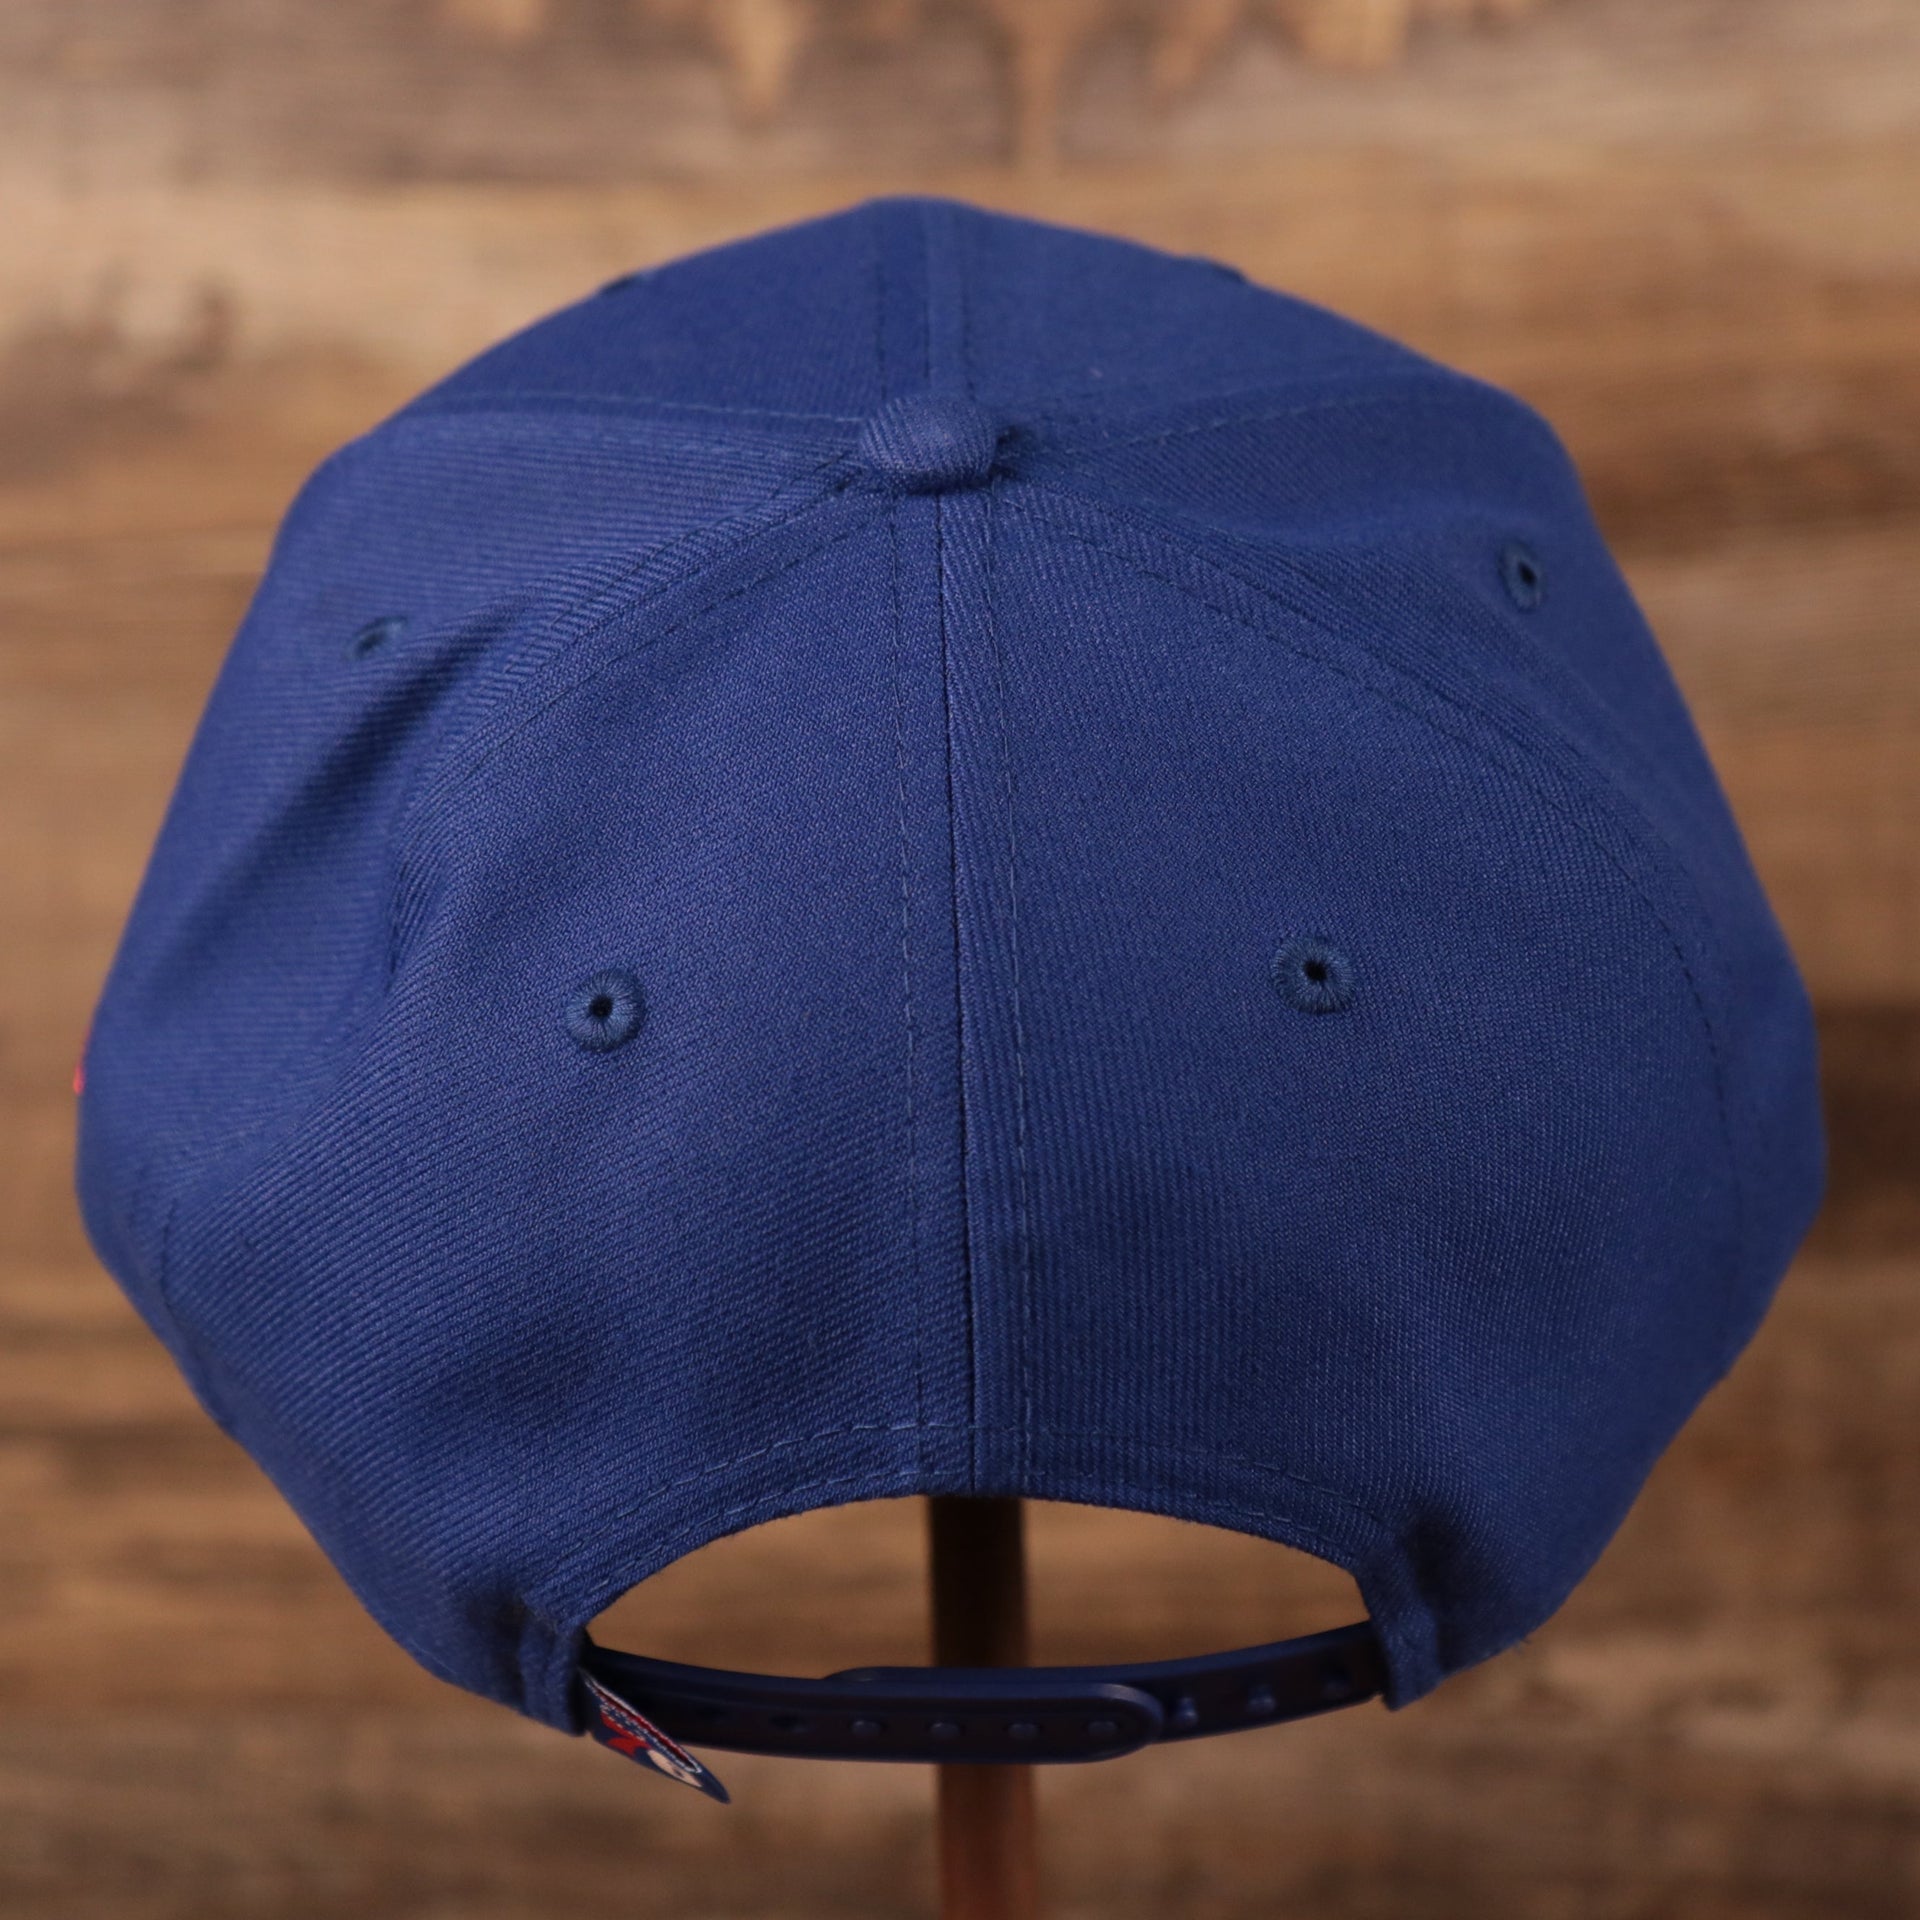 The adjustable stap of the youth royal blue Philadelphia 76ers logo tear 9fifty hat.